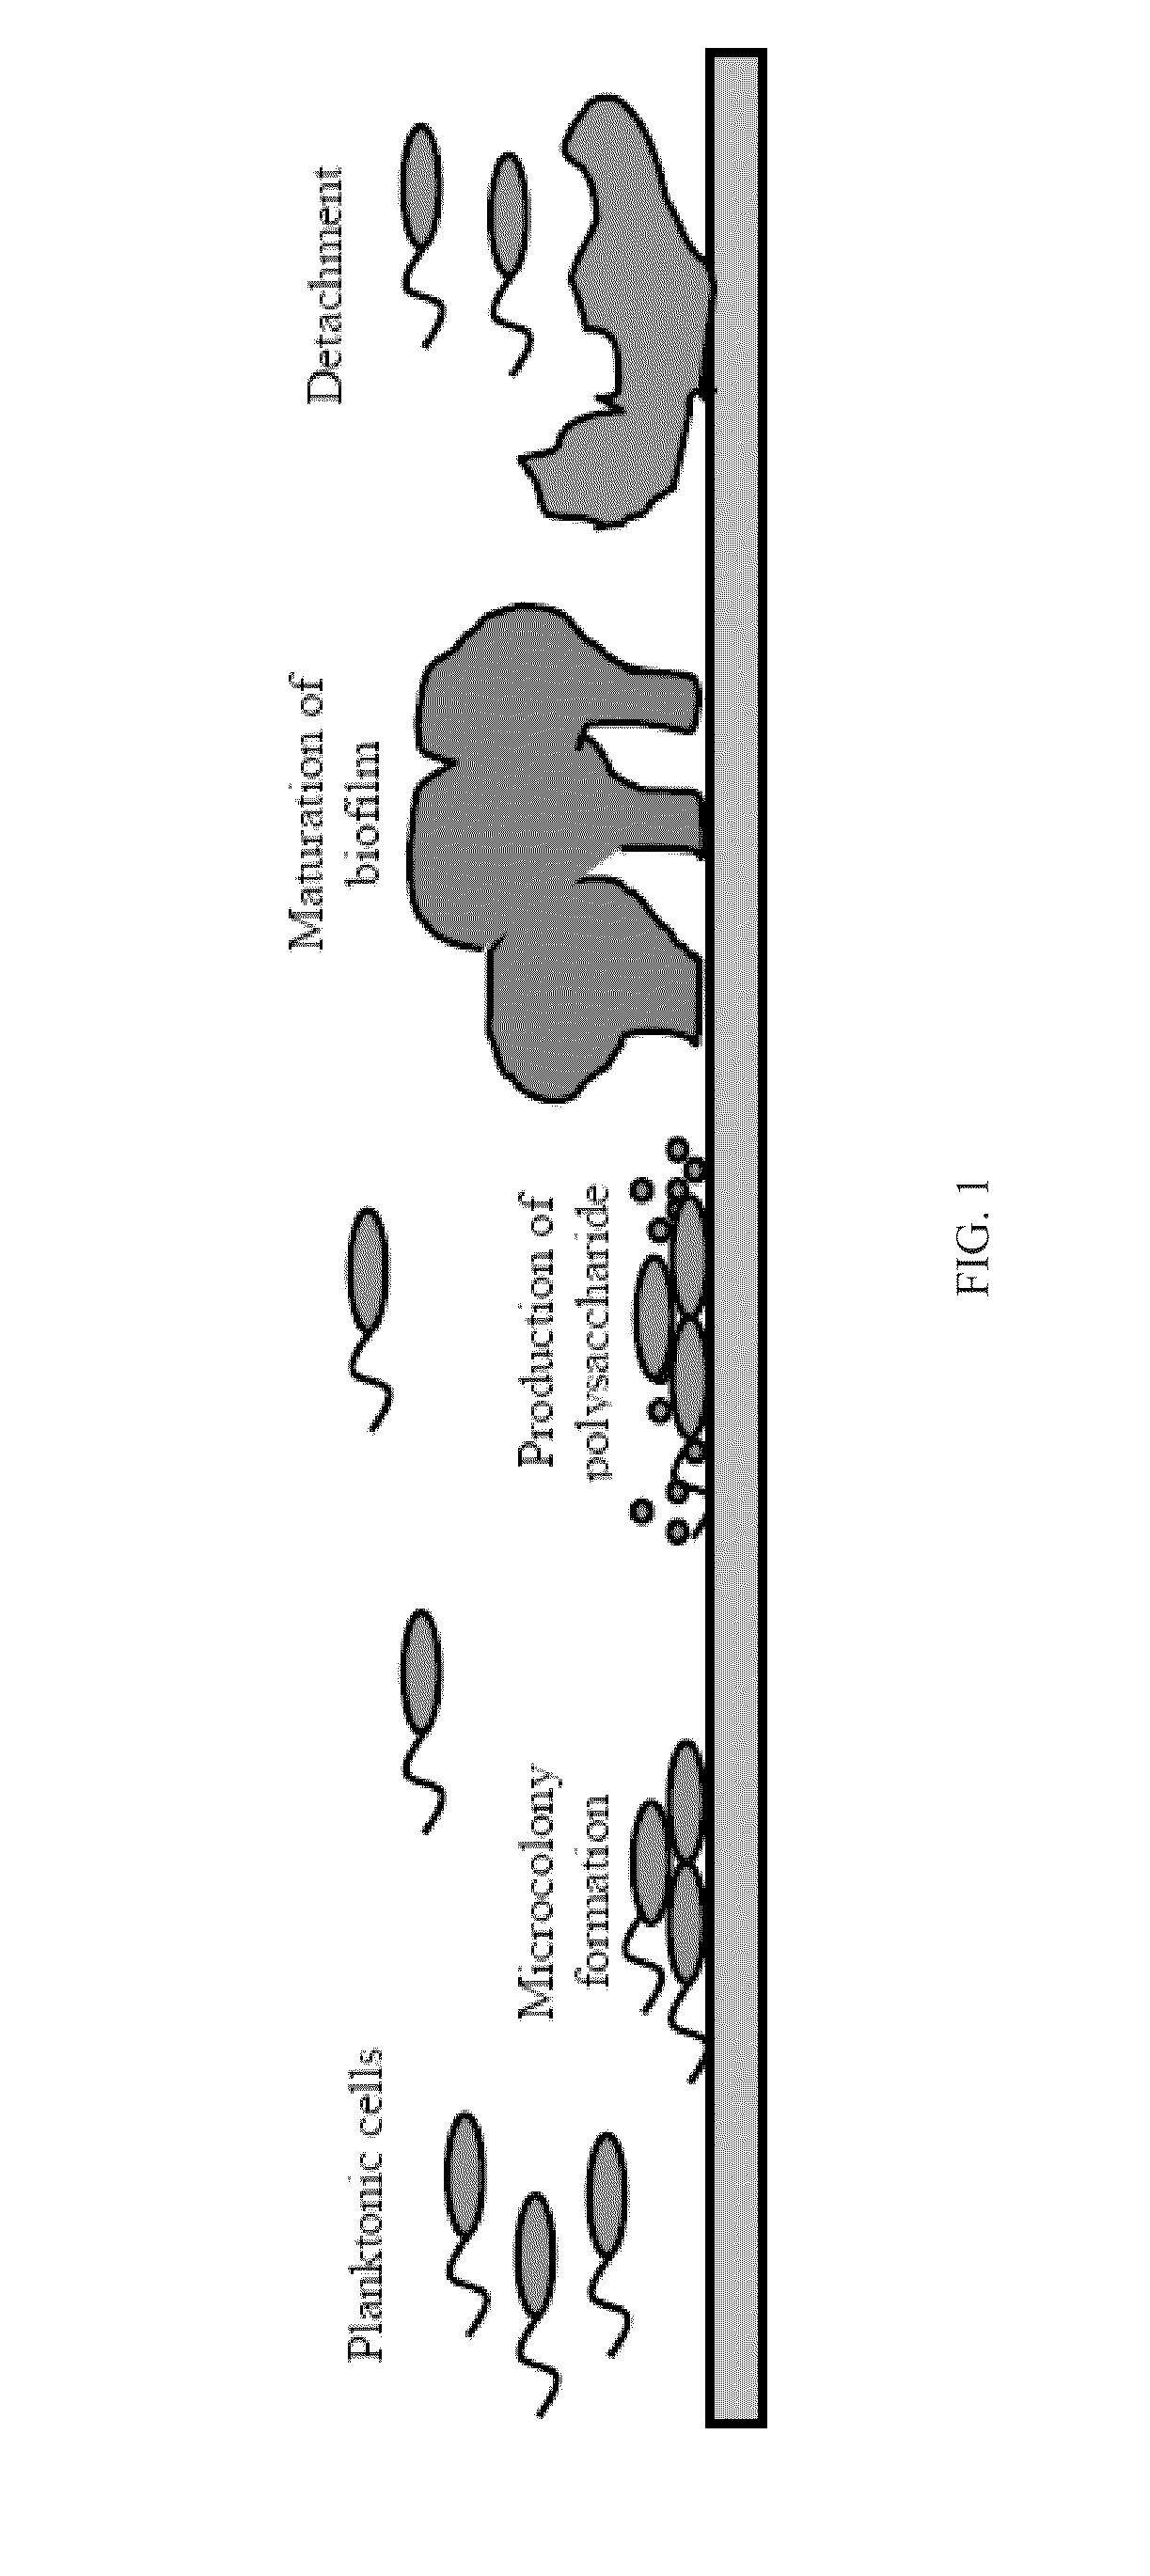 System And Method For Controlling Bacterial Persister Cells With Weak Electric Currents